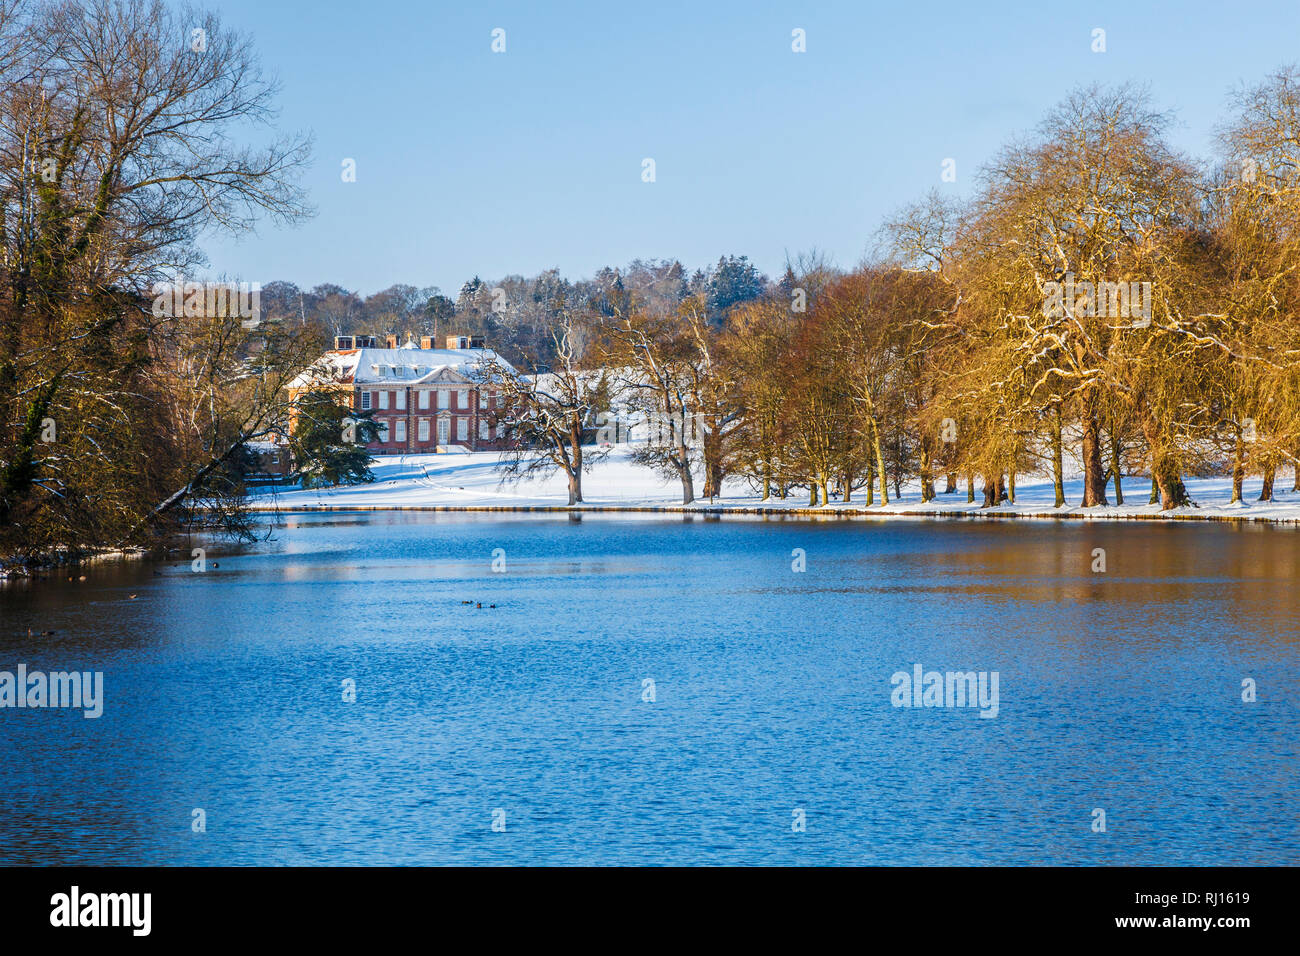 A snowy winter's day on the Ramsbury Manor Estate in Wiltshire. Stock Photo